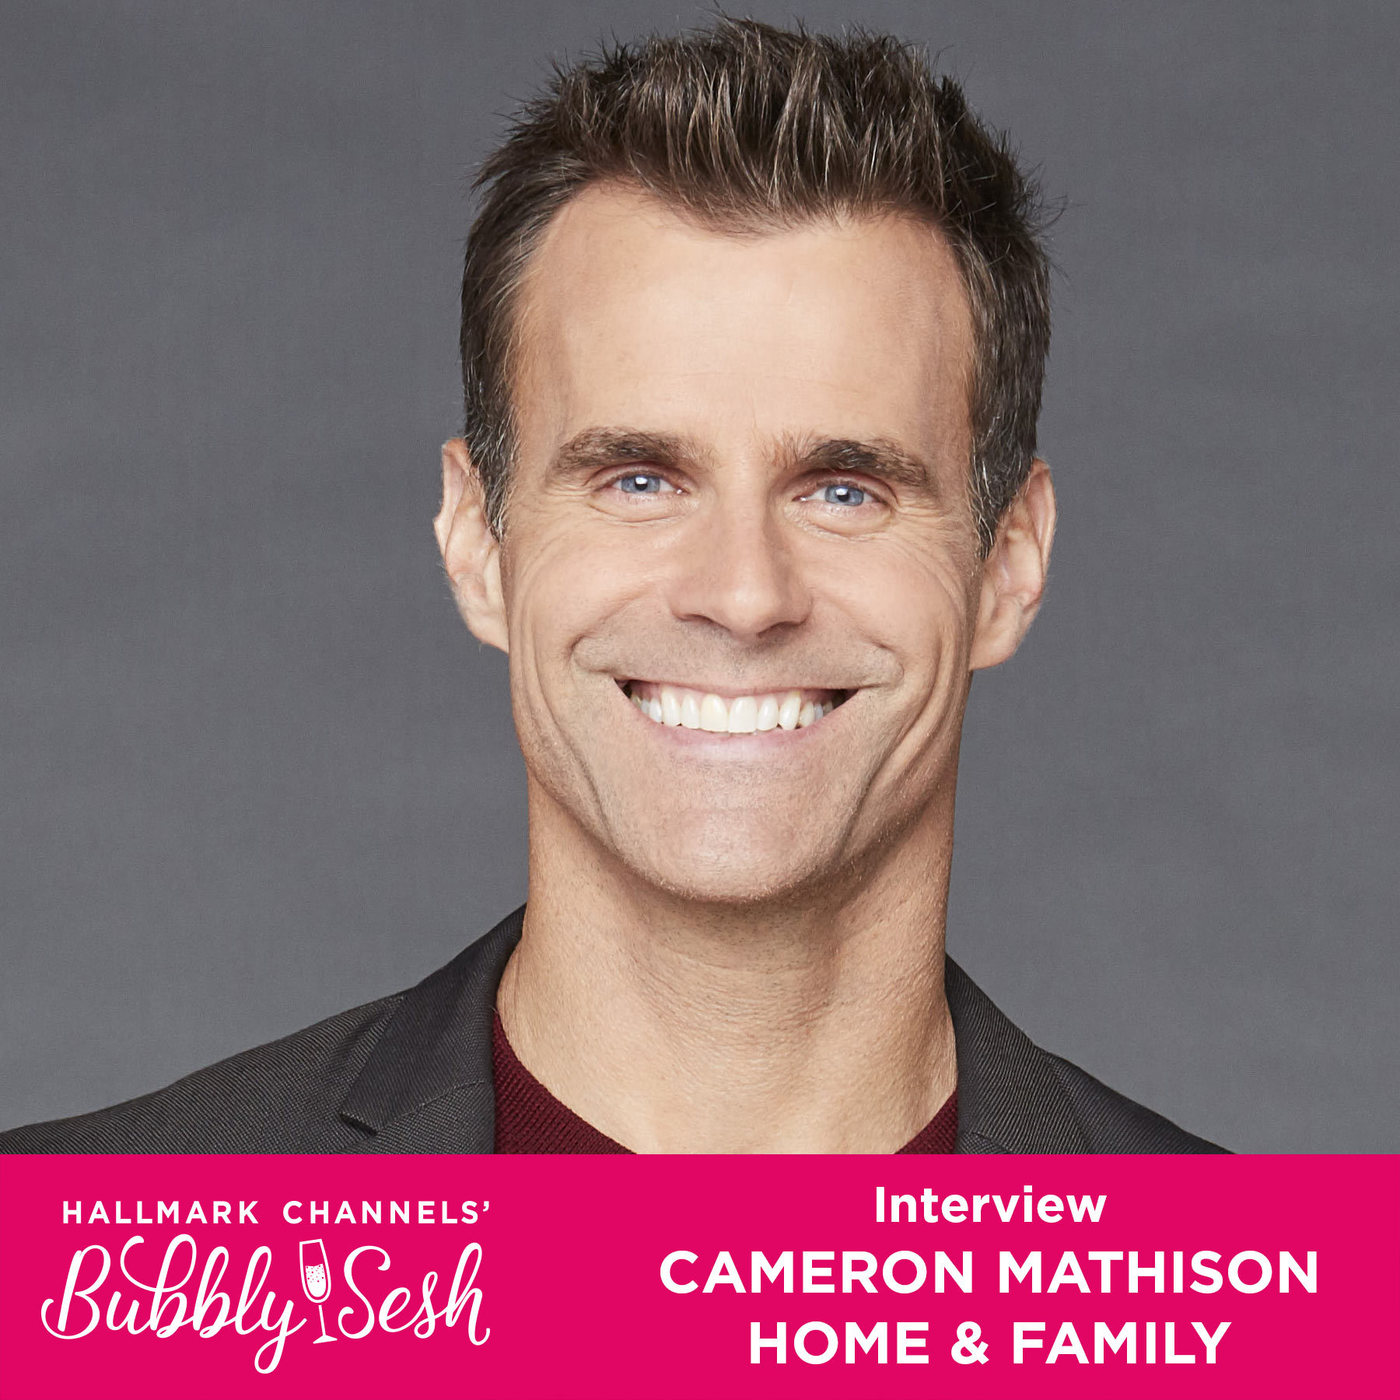 Cameron Mathison Interview - Home & Family 